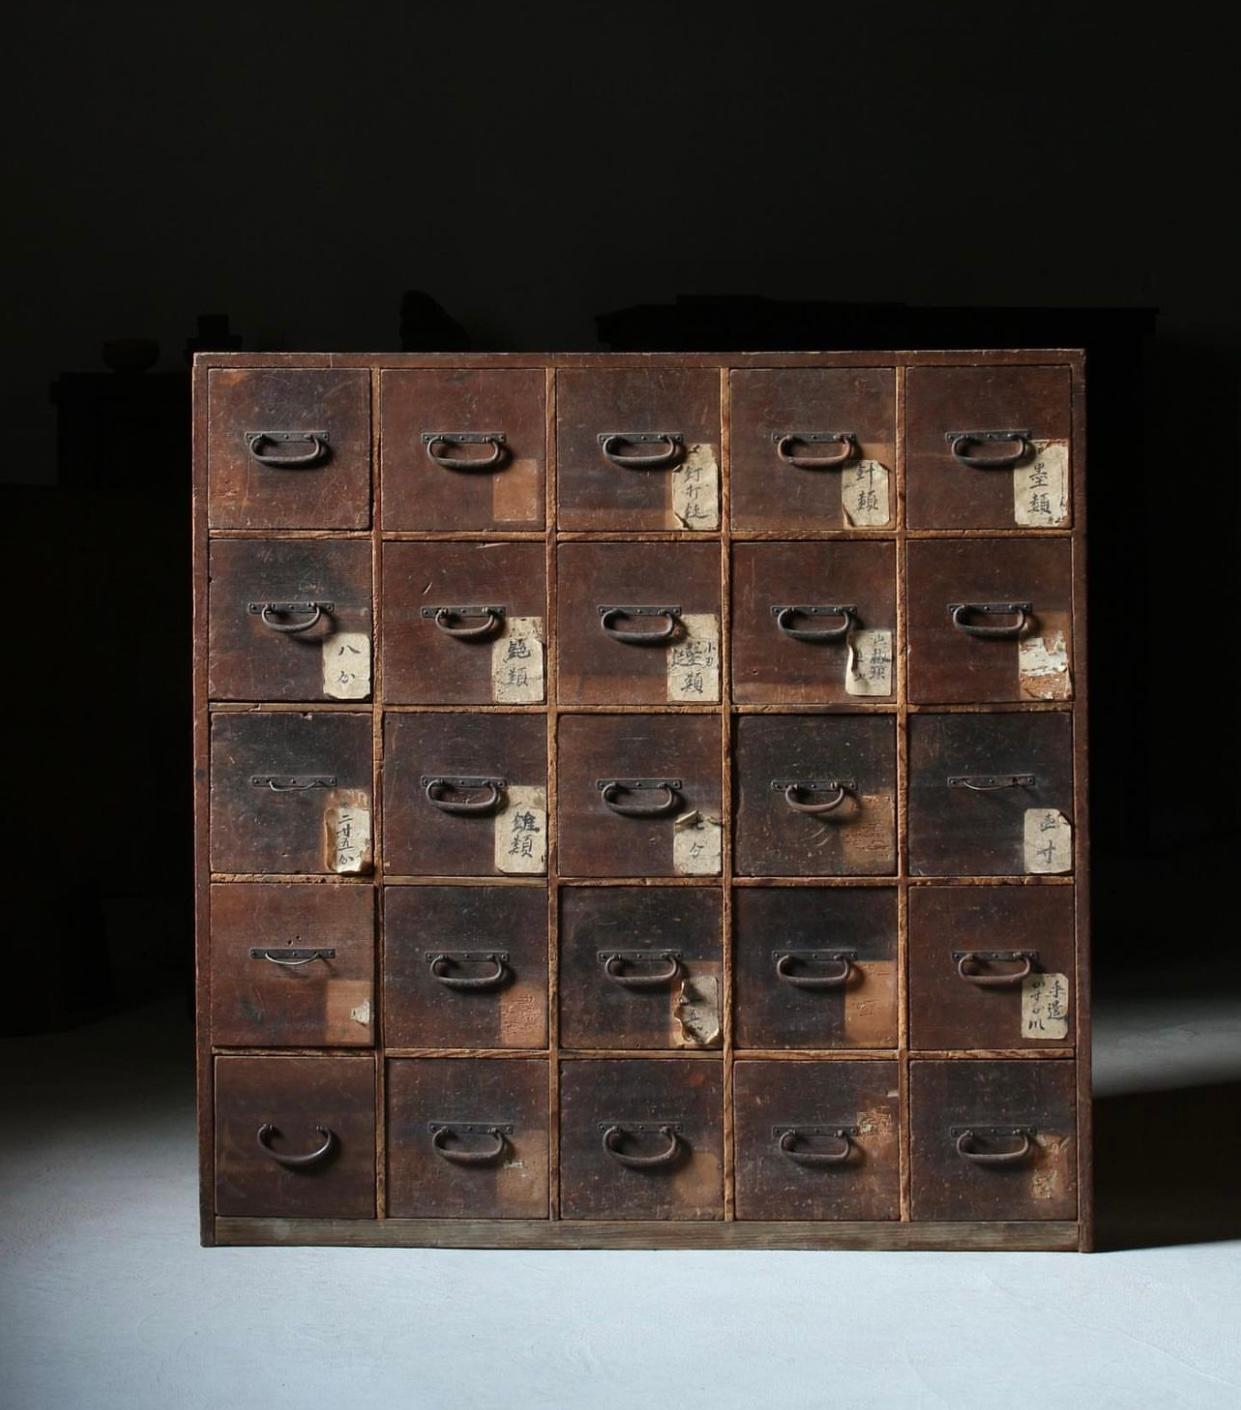 This is a very old and rare Japanese tooling storage tansu. It was made early
Edo period of Japanese cedar and its handle was made of iron. Its ultimate beauty can be seen from its ratio and balance designed by the maker and textures wore by